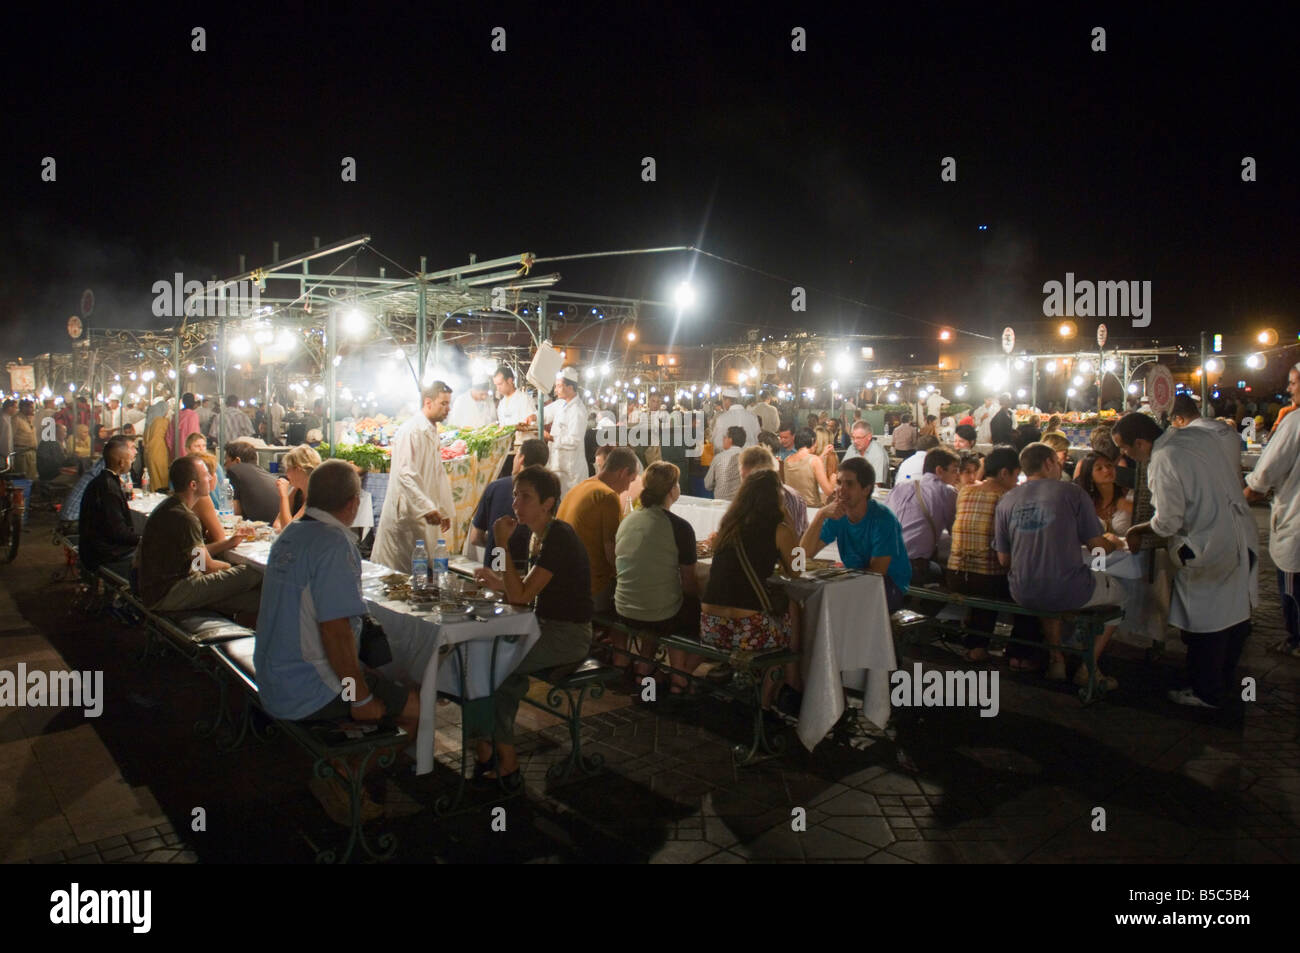 A view of the open air 'restaurants' at the Djemaa El Fna in Marrakesh at night with people eating. Stock Photo